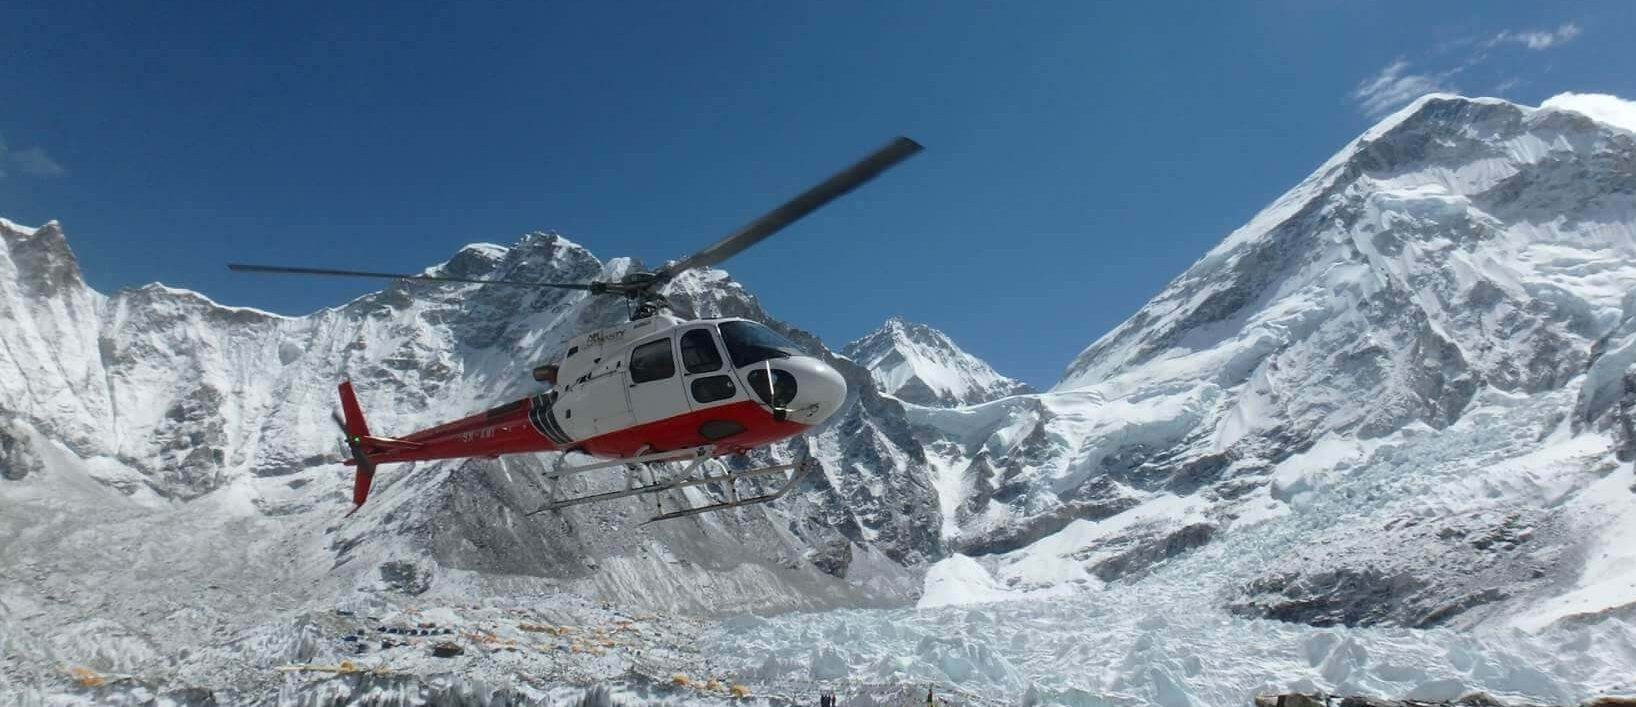 Everest Base Camp Helicopter Tour 